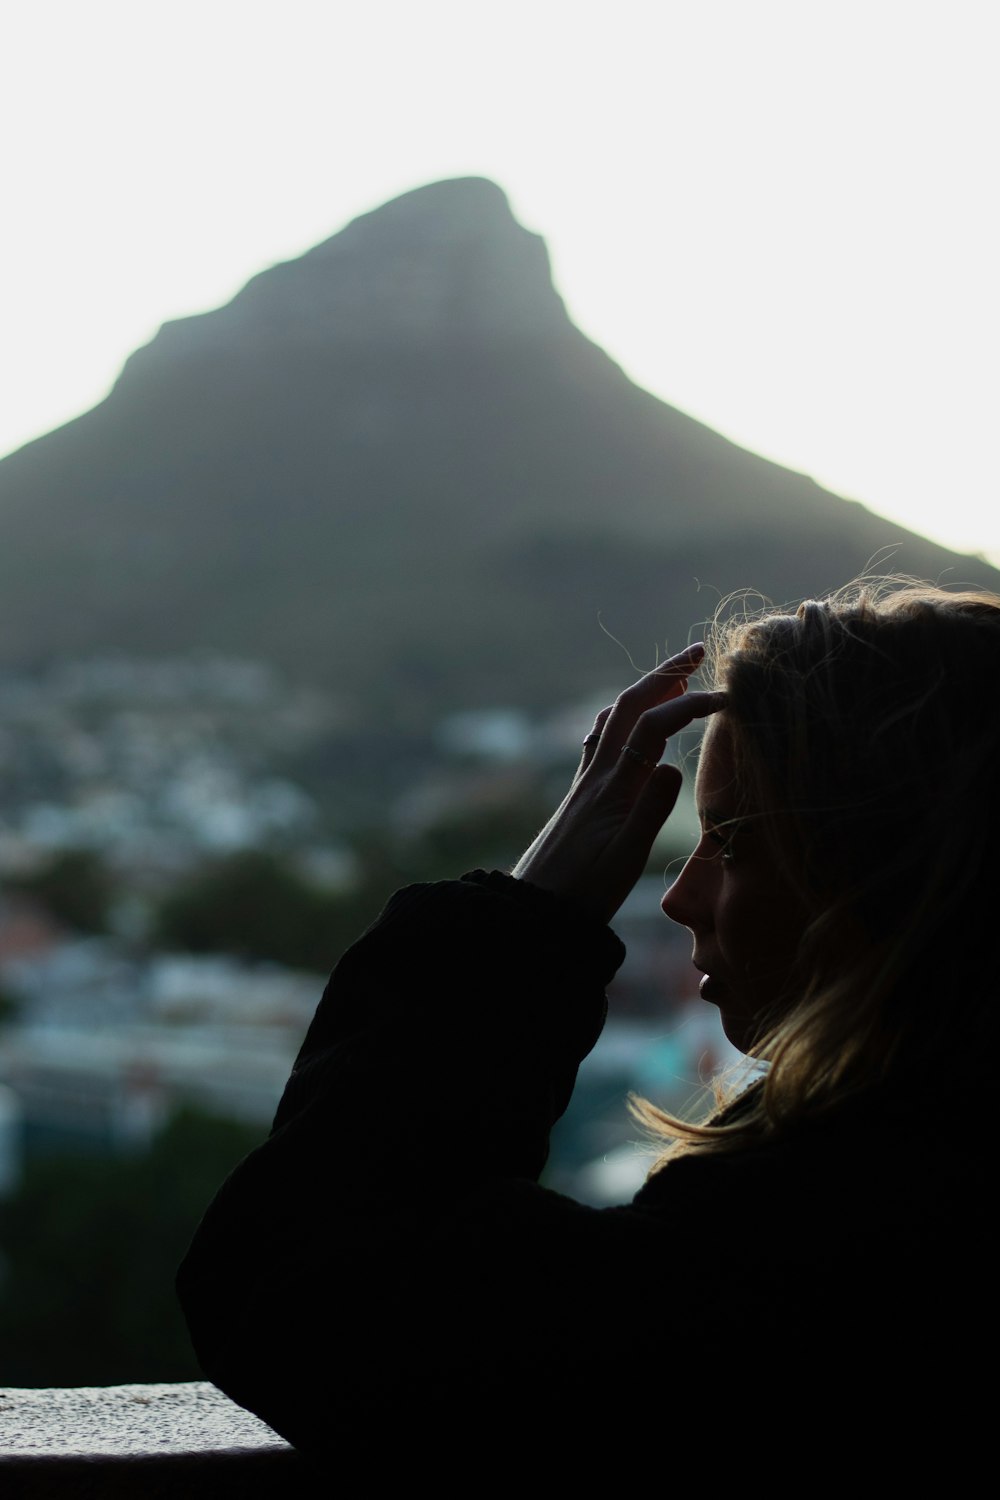 a woman looking out a window at a mountain